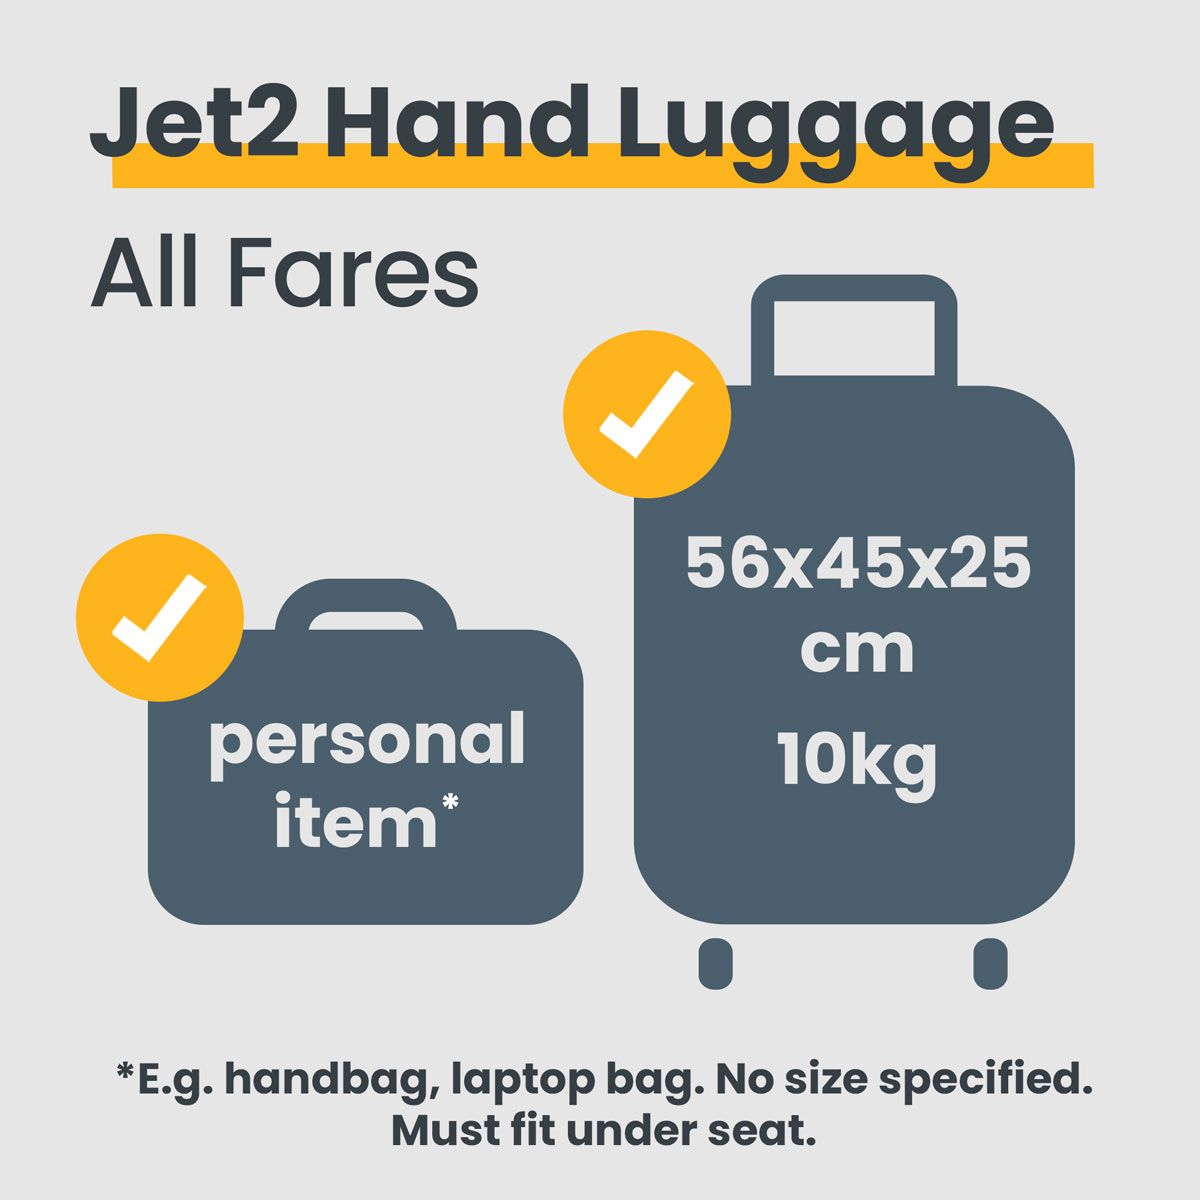 The Complete Guide to Jet2 Hand Luggage: Size Restrictions, Packing Tips, and More